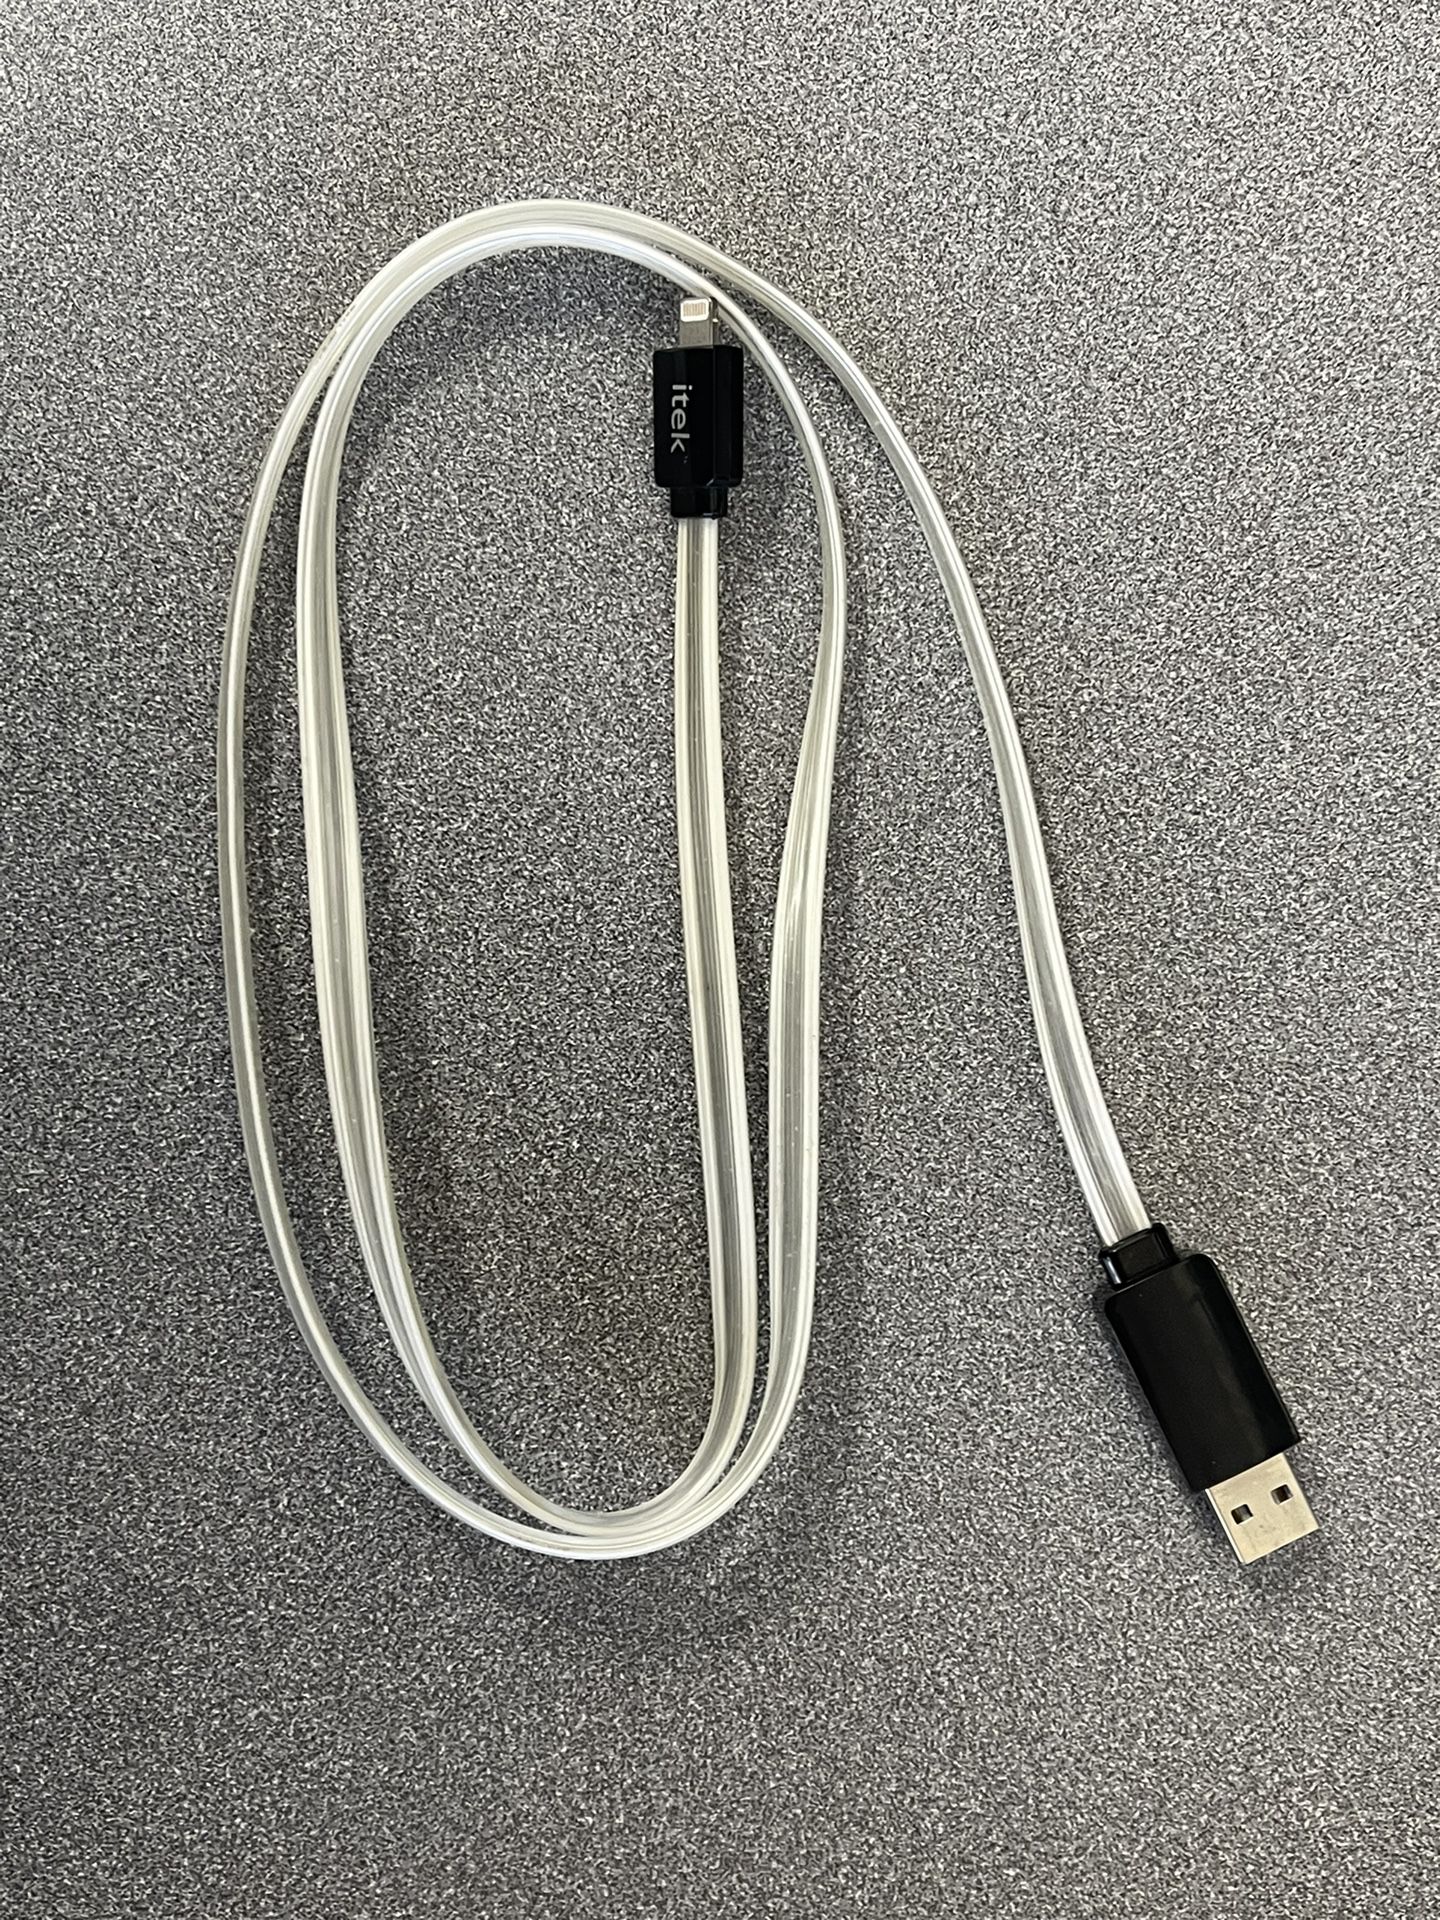 Itek 3ft RGB iPhone Charging Cable